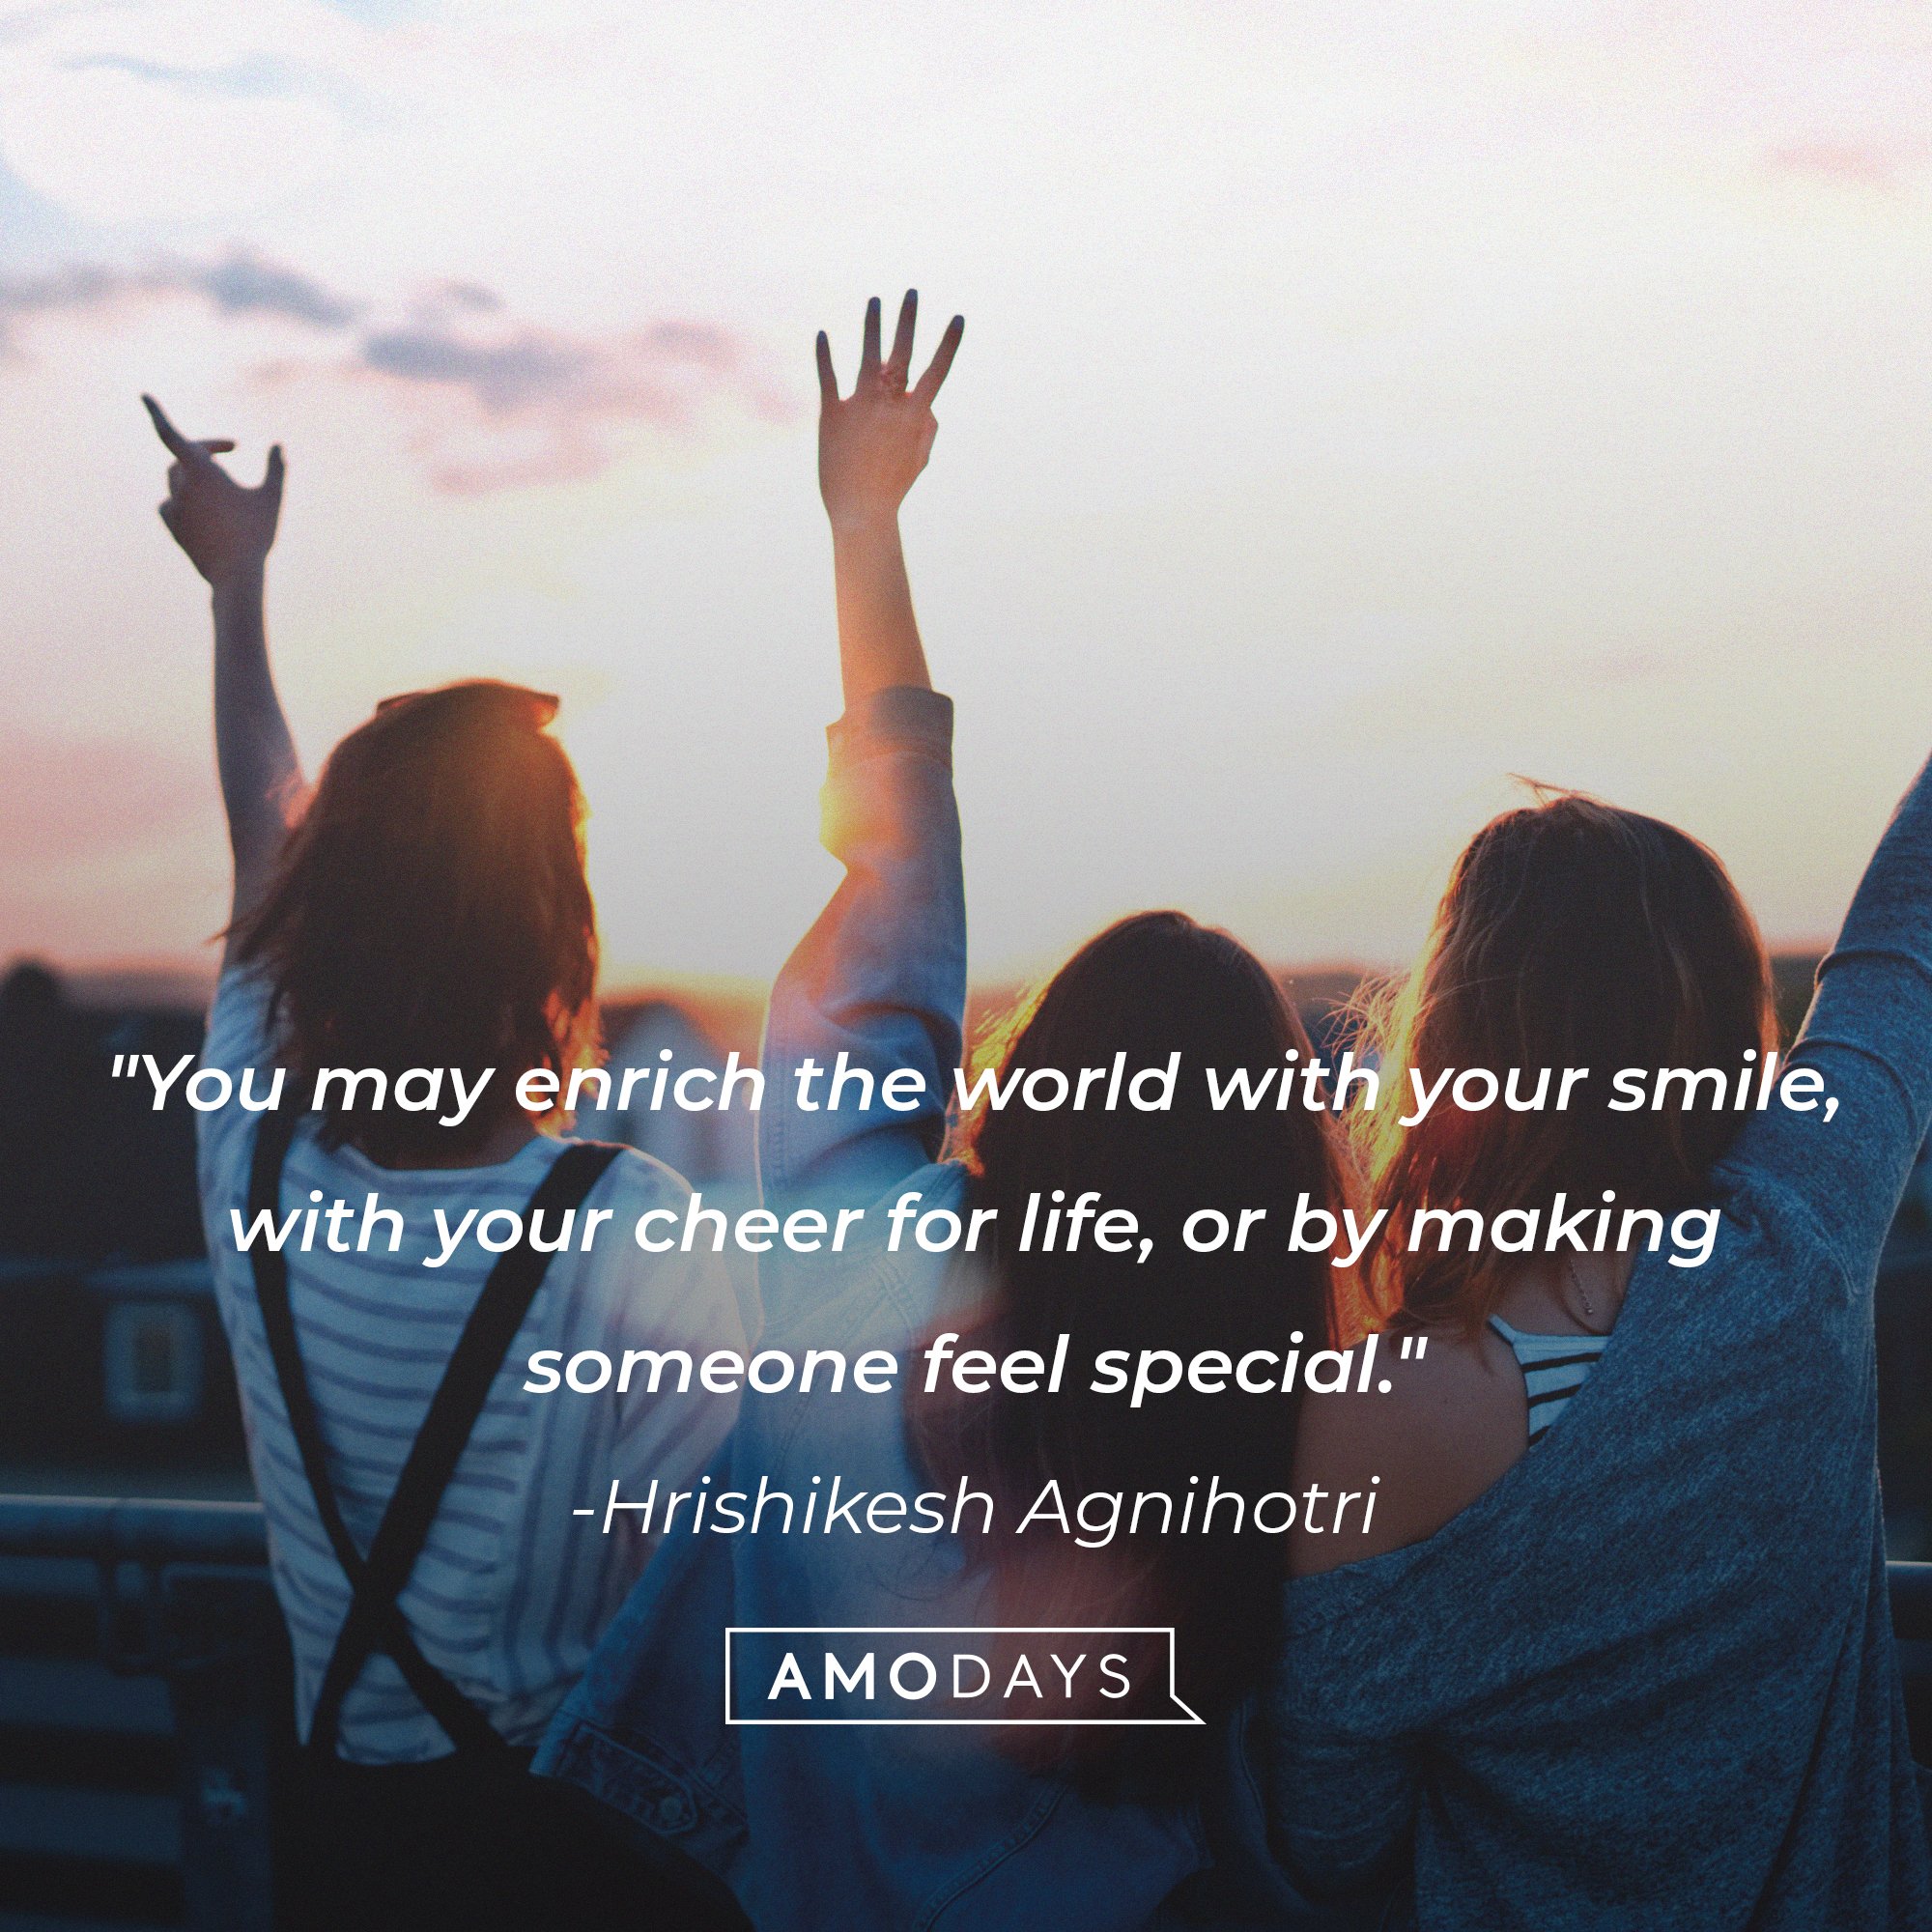 Hrishikesh Agnihotri’s quote: "You may enrich the world with your smile, with your cheer for life, or by making someone feel special." | Image: AmoDays